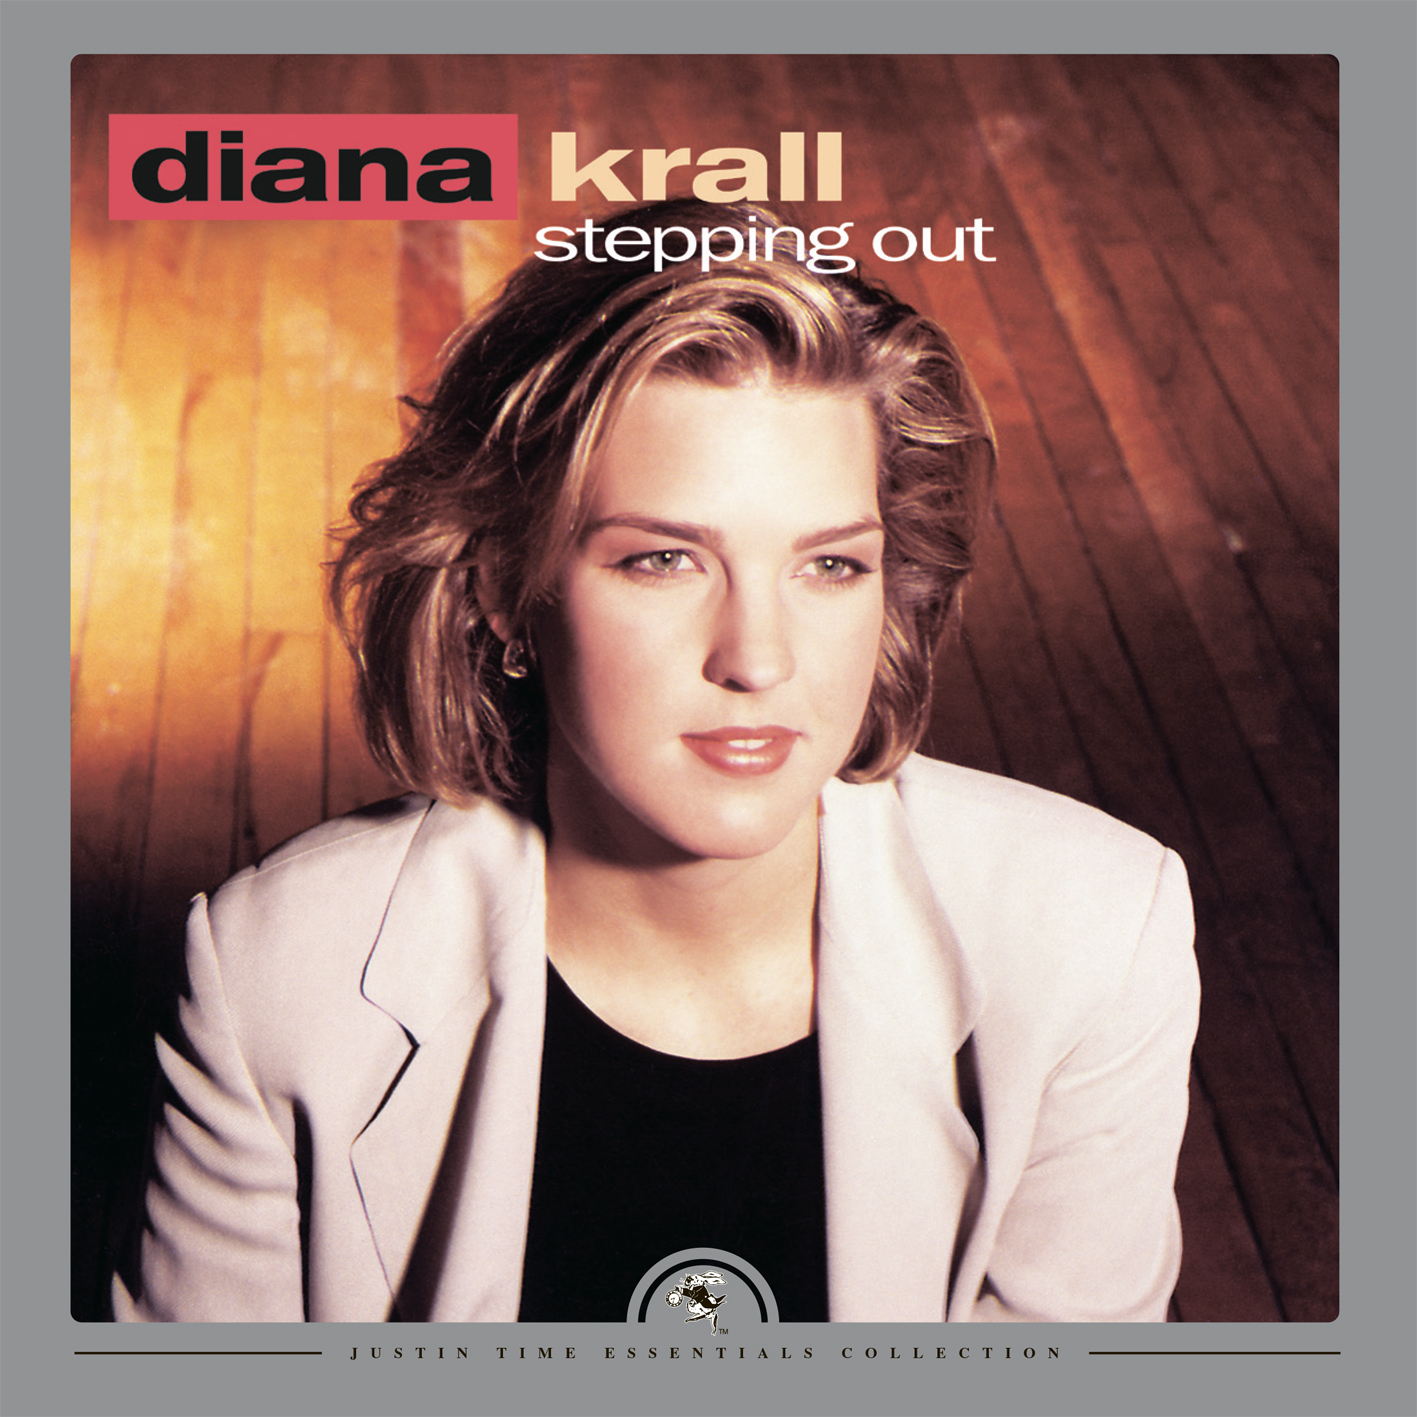 Diana Krall – Stepping Out (1993) [Remastered 2016] [HDTracks FLAC 24bit/96kHz]